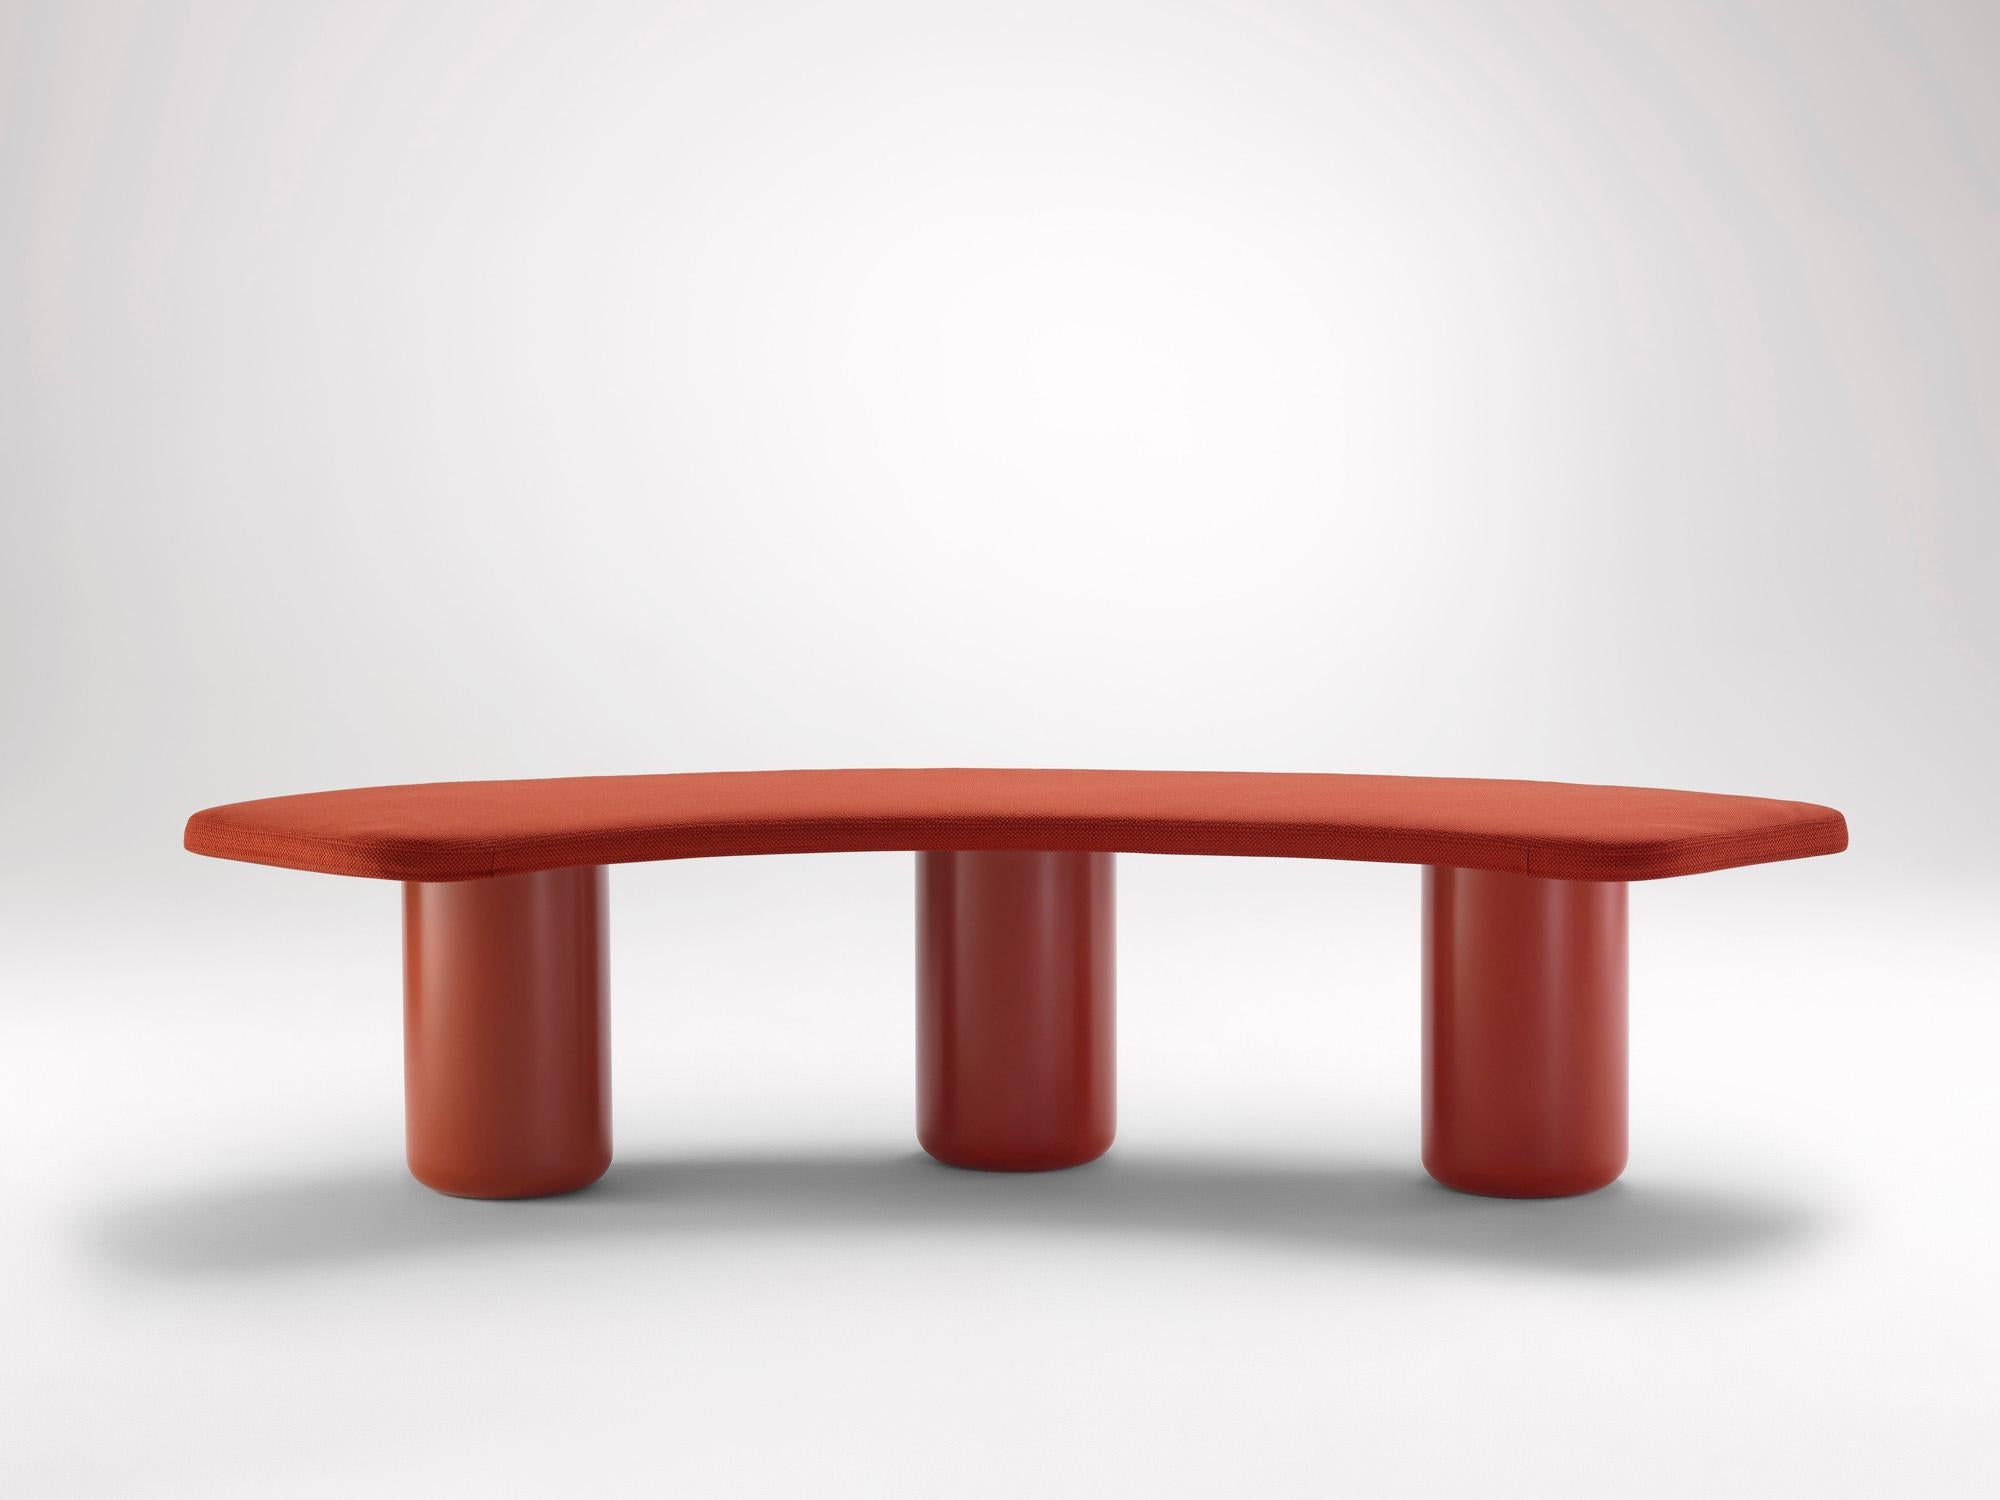 Small Headland Red Curved Bench by Coco Flip
Dimensions: D 65 x W 165 x H 42 cm
Materials: Mild steel, powder-coated with zinc undercoat. 
Weight: 42 kg

Coco Flip is a Melbourne based furniture and lighting design studio, run by us, Kate Stokes and